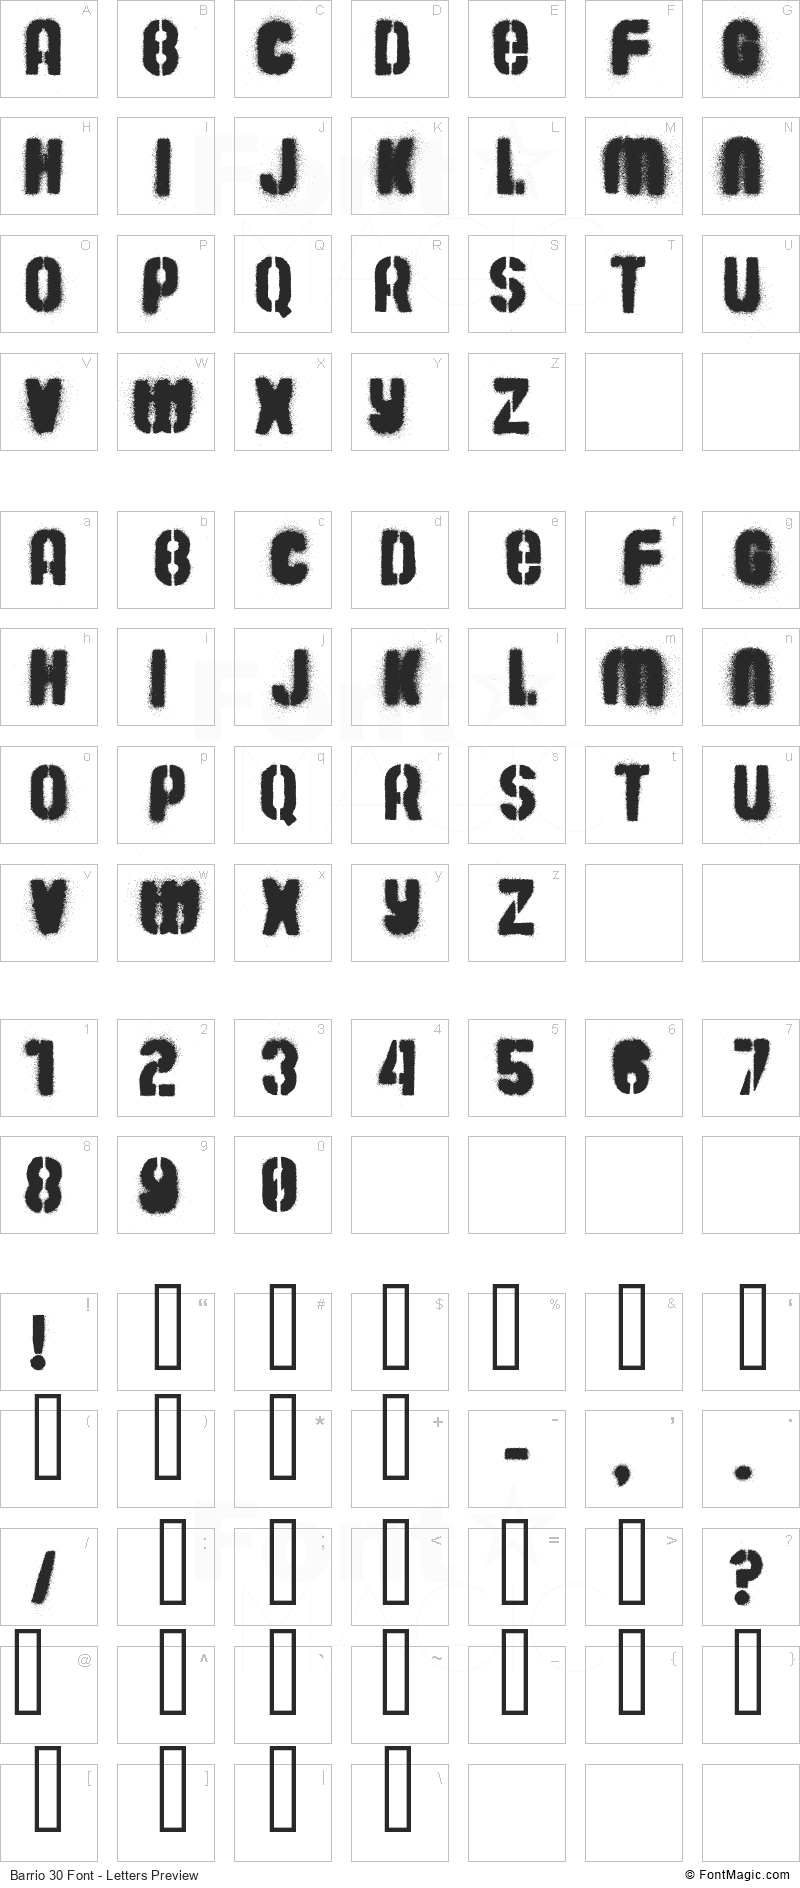 Barrio 30 Font - All Latters Preview Chart